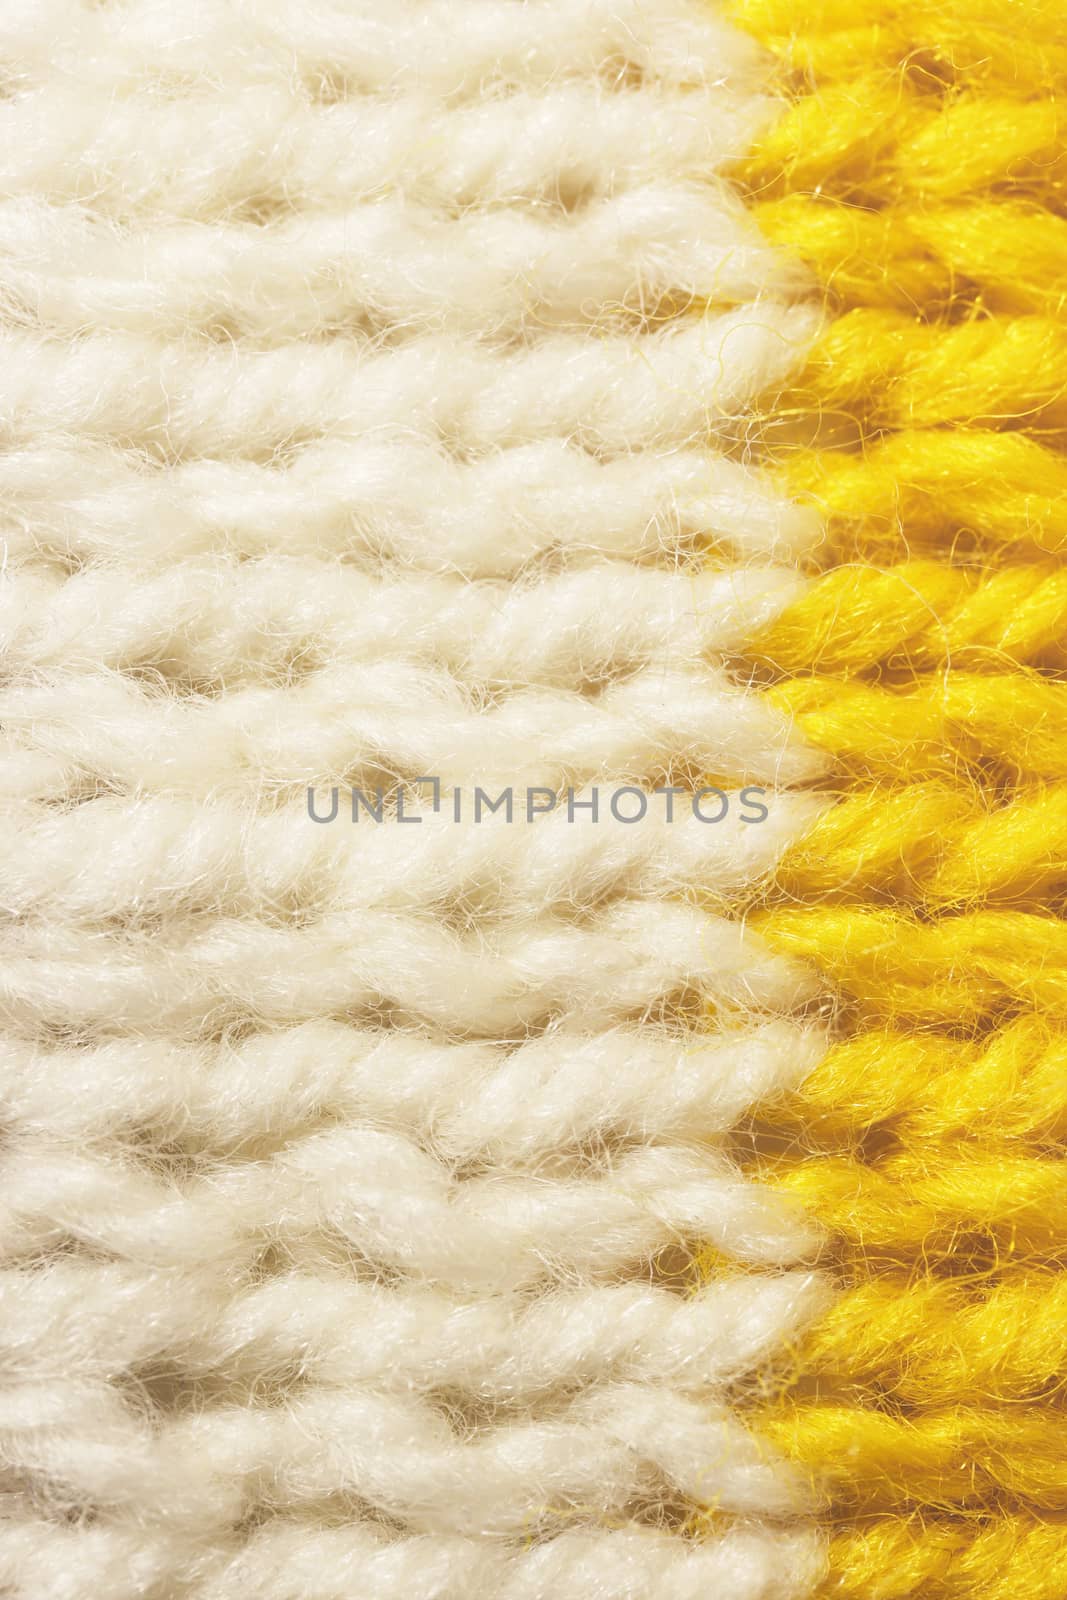 White Yellow Wool Knitting Texture. Horizontal Along Weaving Crochet Detailed Rows. Sweater Textile Background. Macro Closeup. by sanches812